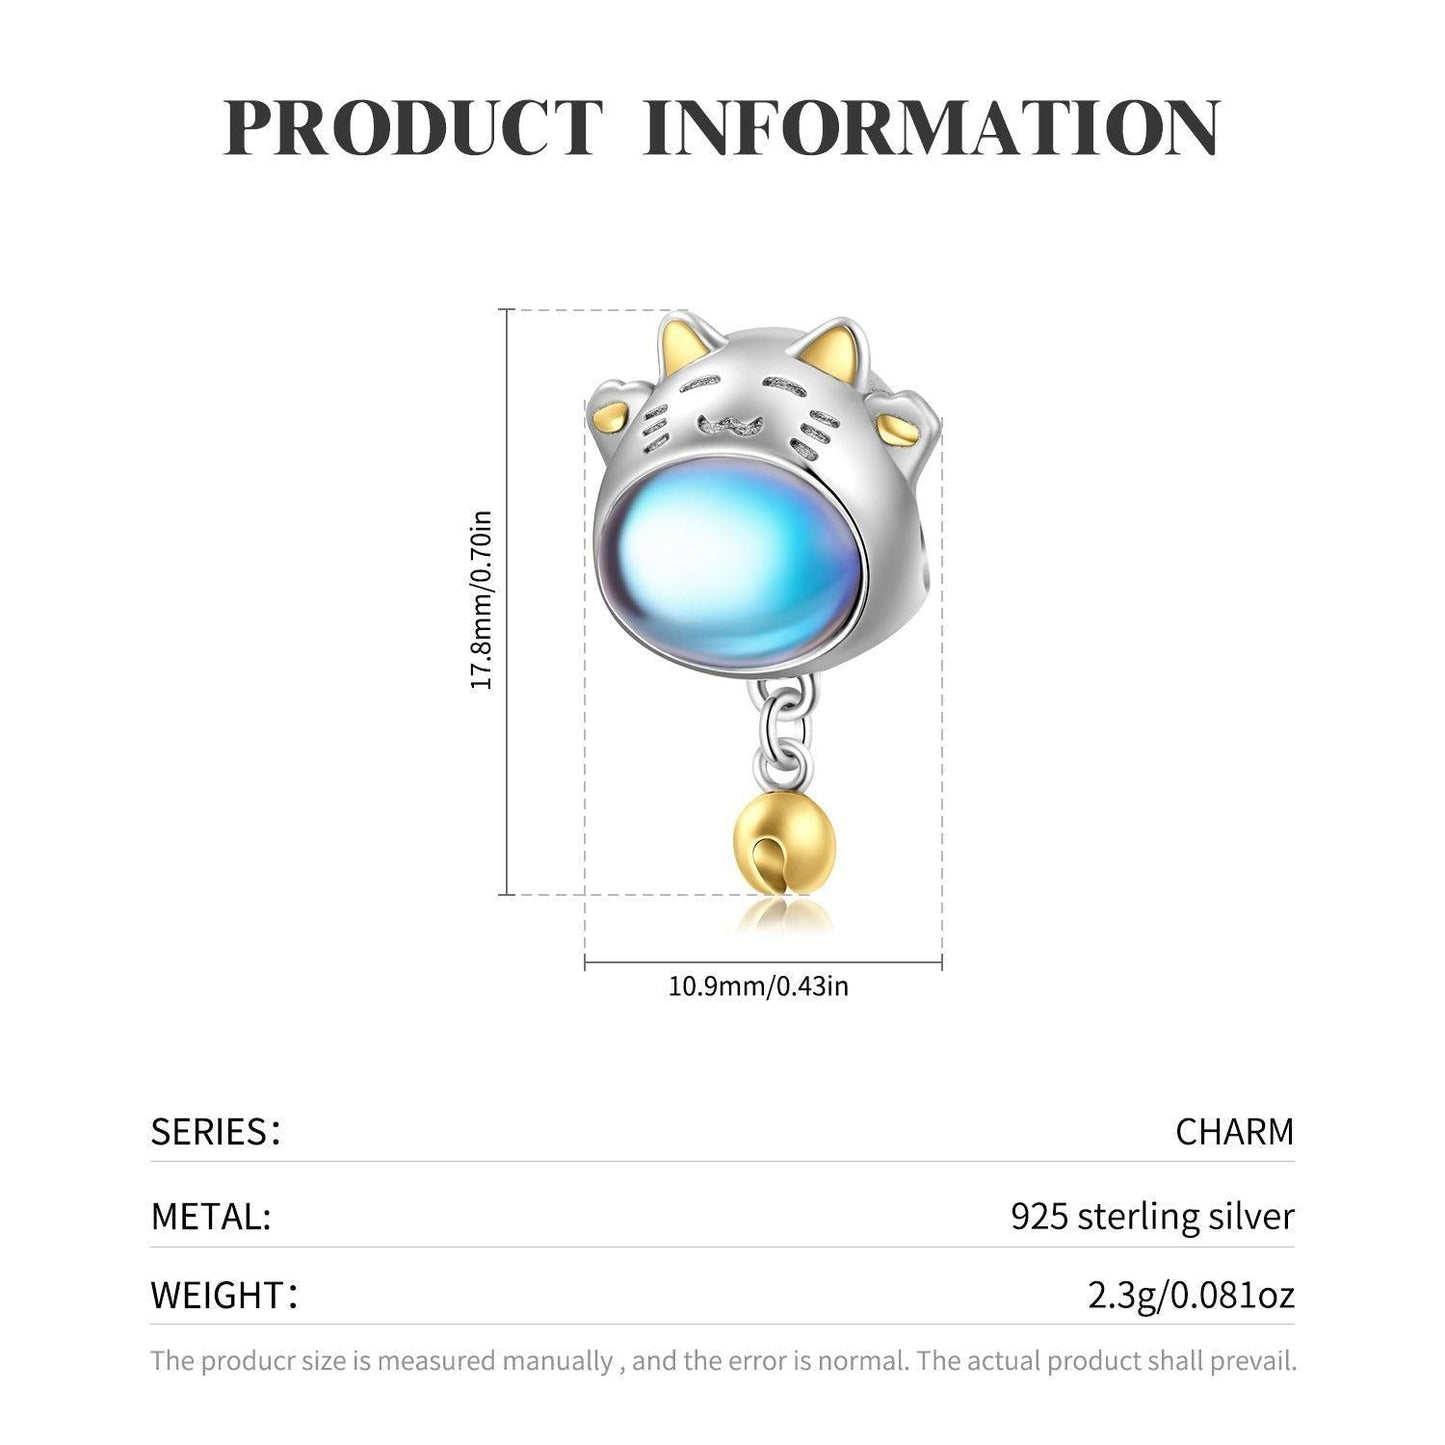 S925 Lovely Animal Beading Wind Diy Bead Charm in 2023 | S925 Lovely Animal Beading Wind Diy Bead Charm - undefined | Accessories Diy Beads, Charm Bracelet, cute cat Charm, Cute Charm, Lovely Animal Beading Charm, S925 Sterling Silver Cartoon Charms | From Hunny Life | hunnylife.com